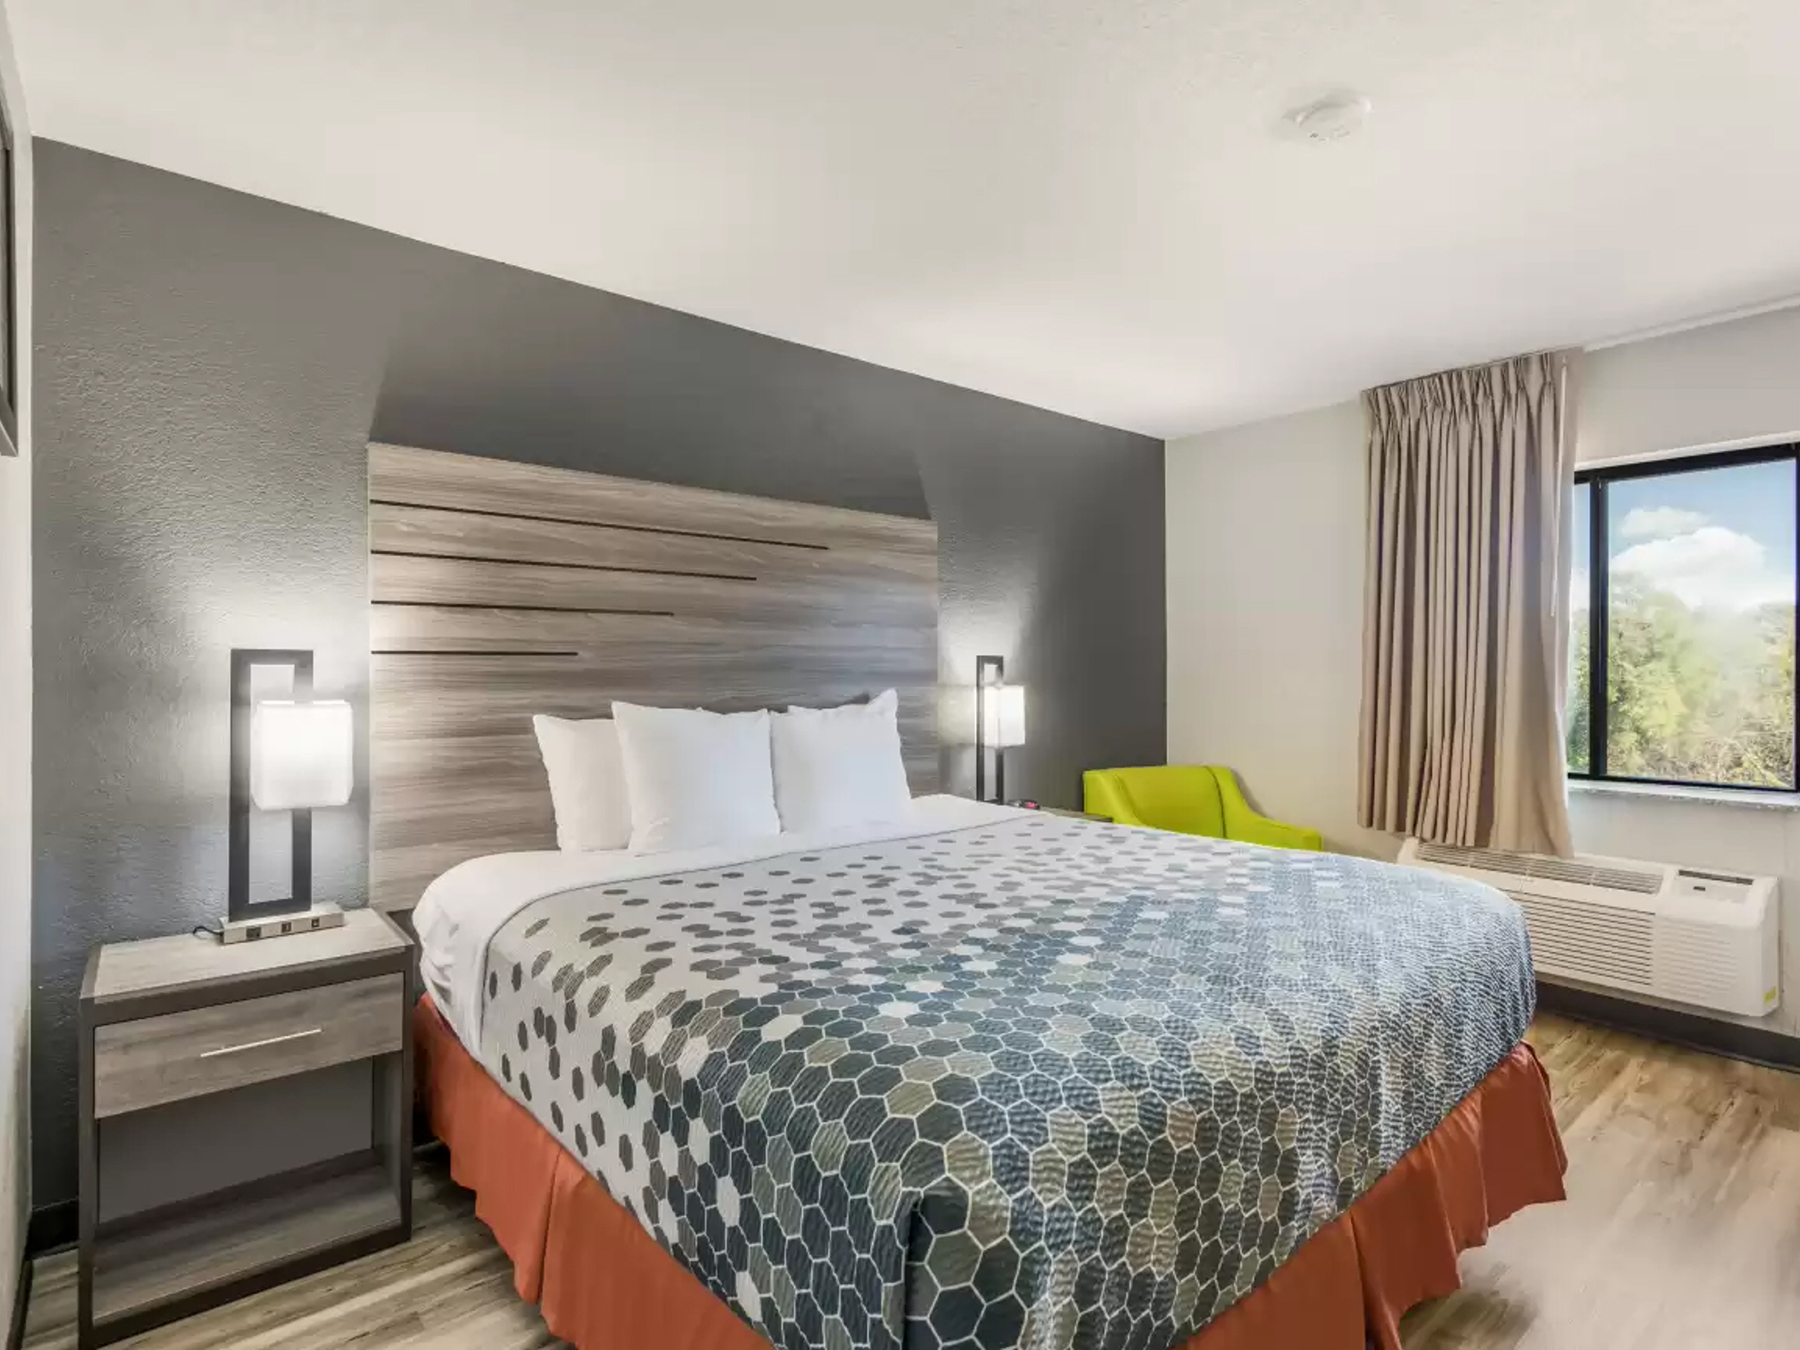 A guestroom with one bed at the Sonesta Essential Des Moines hotel.